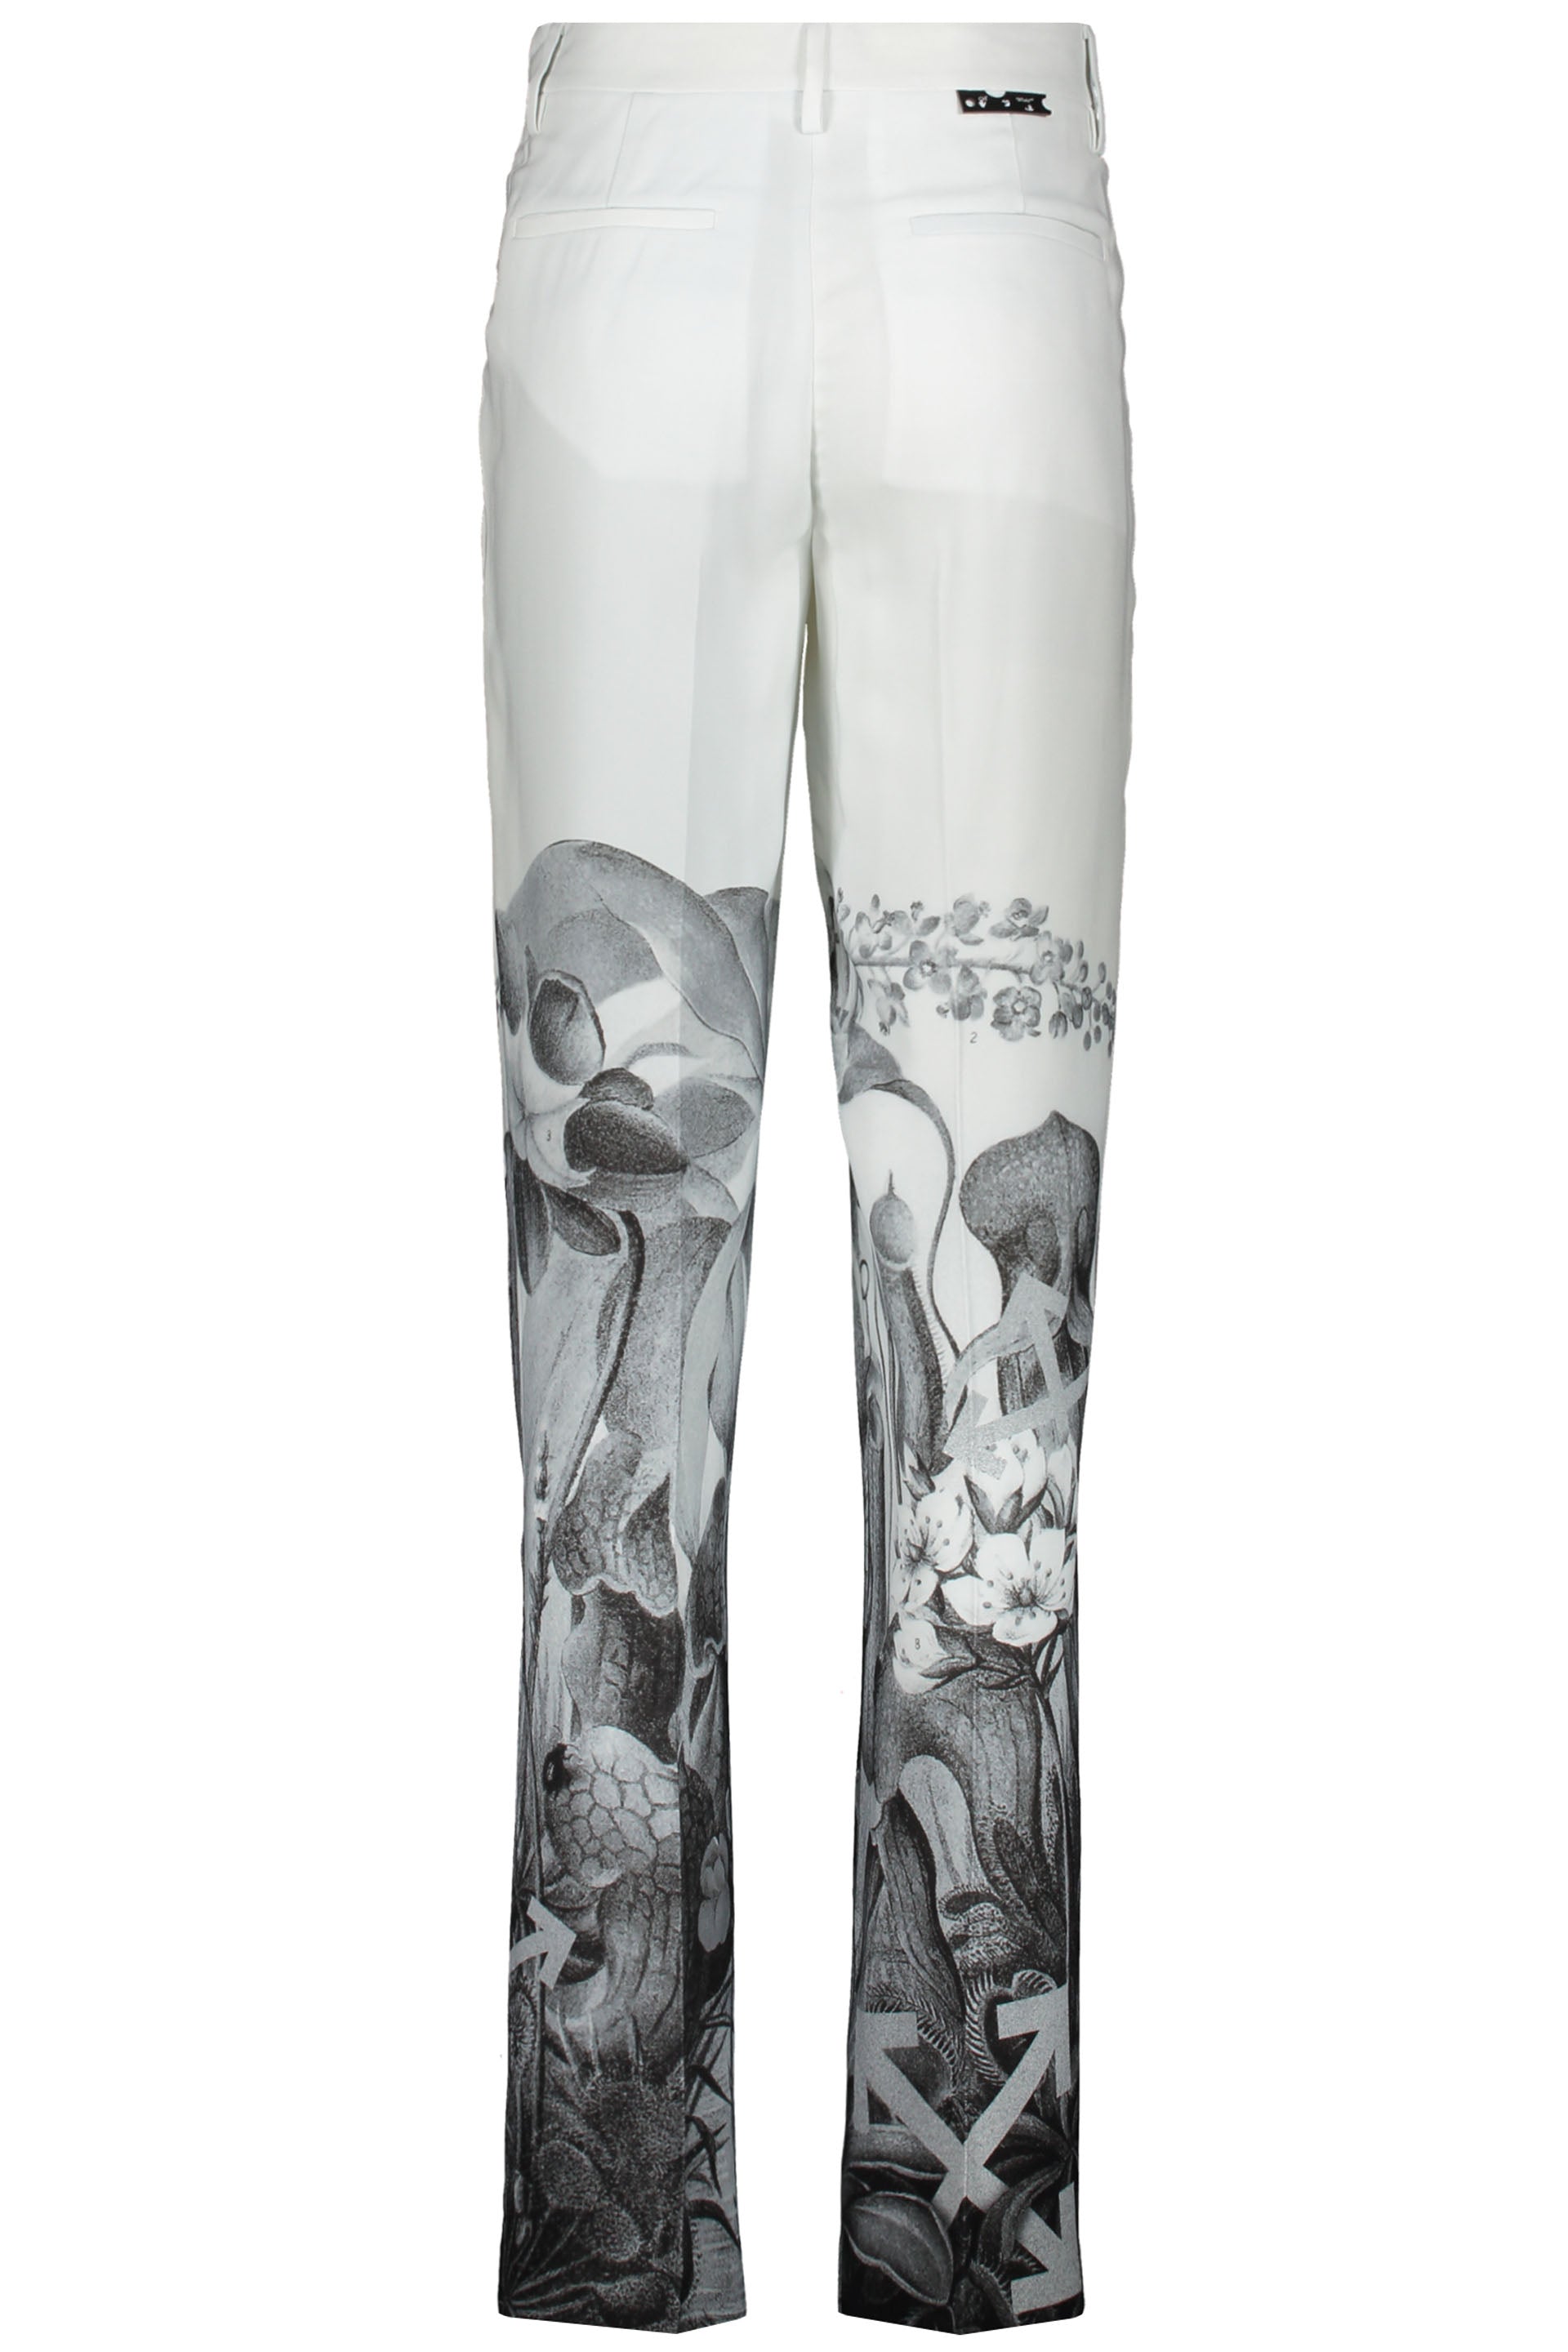 Off-White-OUTLET-SALE-Printed-trousers-Hosen-ARCHIVE-COLLECTION-2.jpg